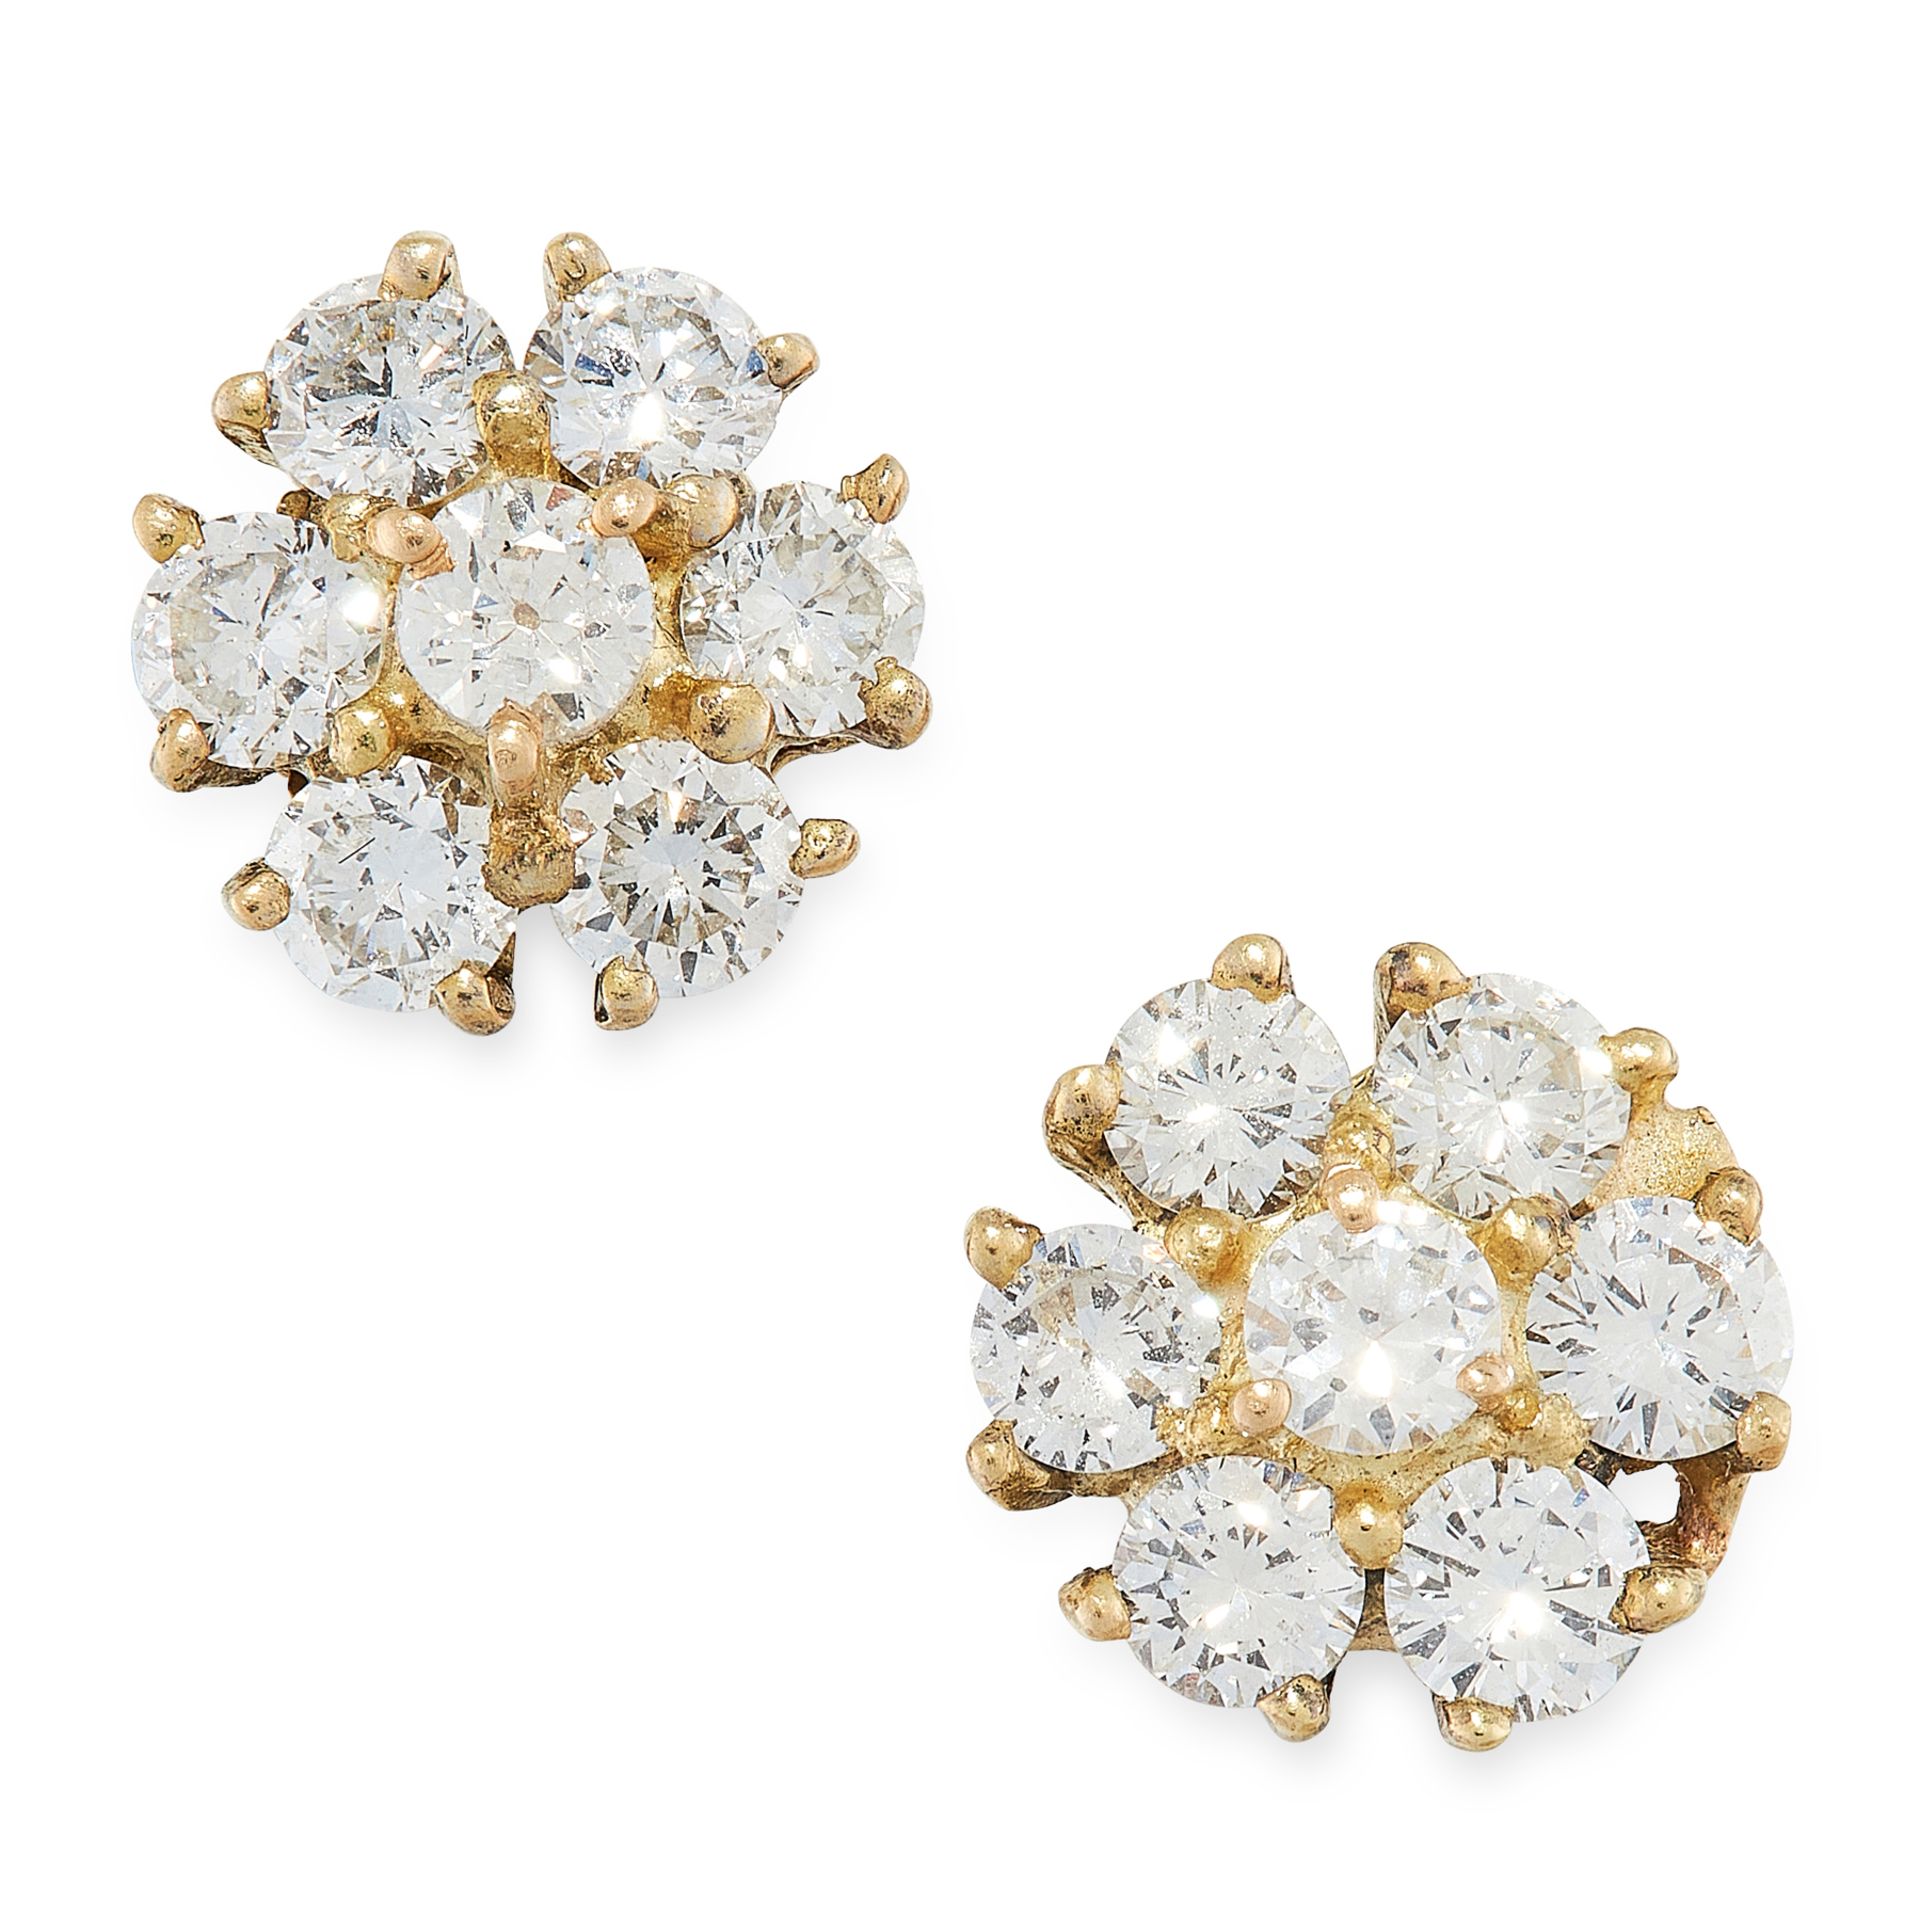 A PAIR OF DIAMOND CLUSTER STUD EARRINGS in 18ct yellow gold, each designed as a cluster of round cut